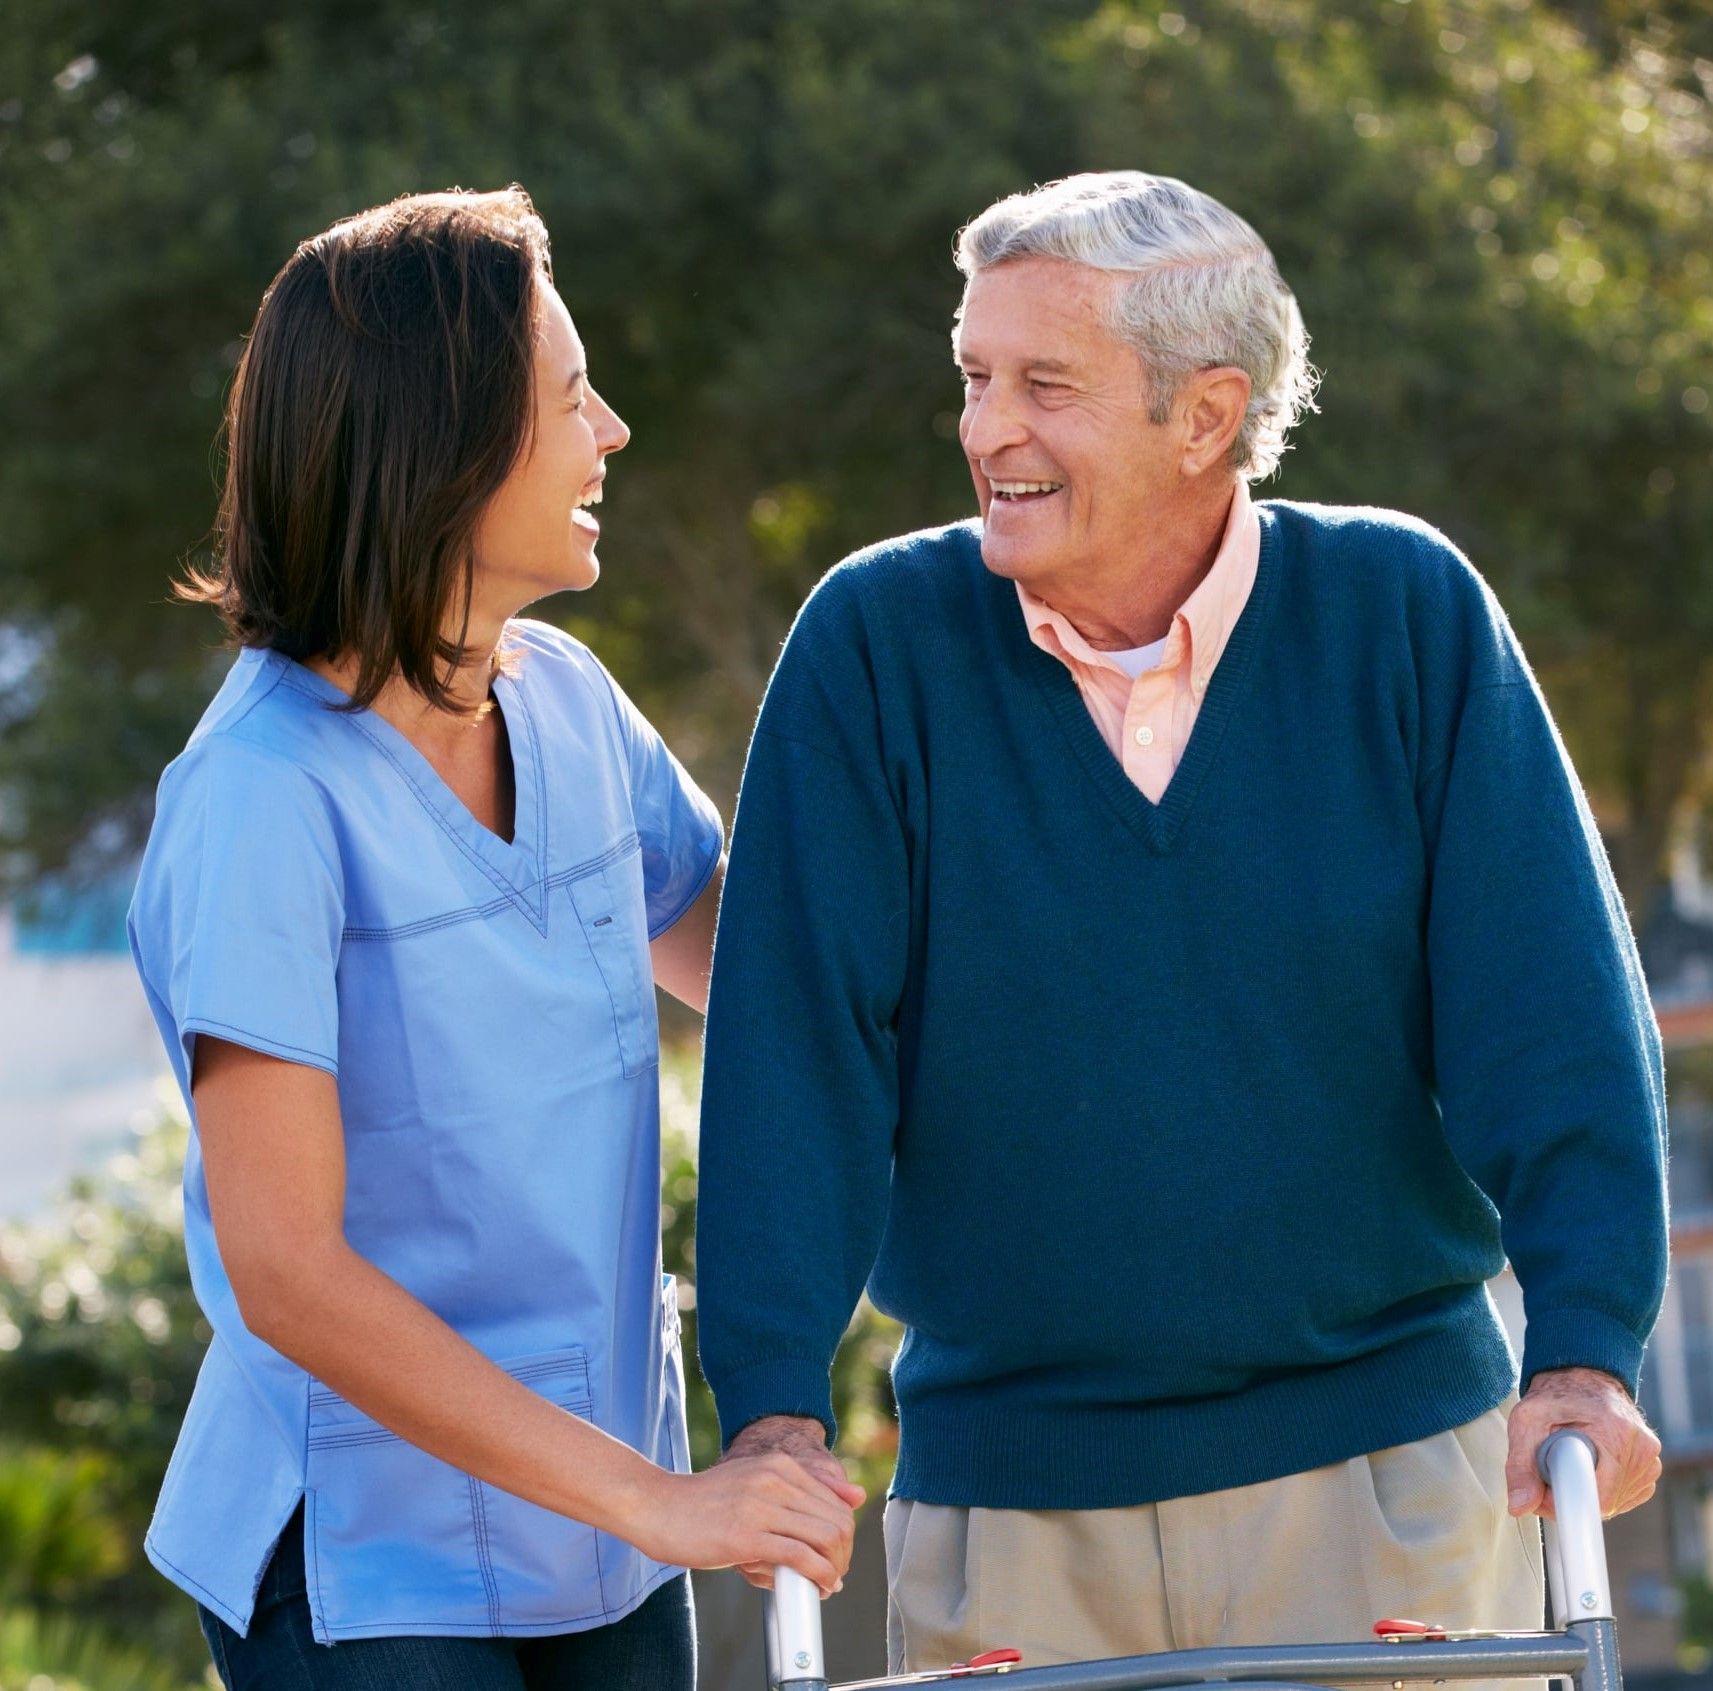 Supportive Services are available at Chestnut Square through our homecare agency, Partners in Healthcare